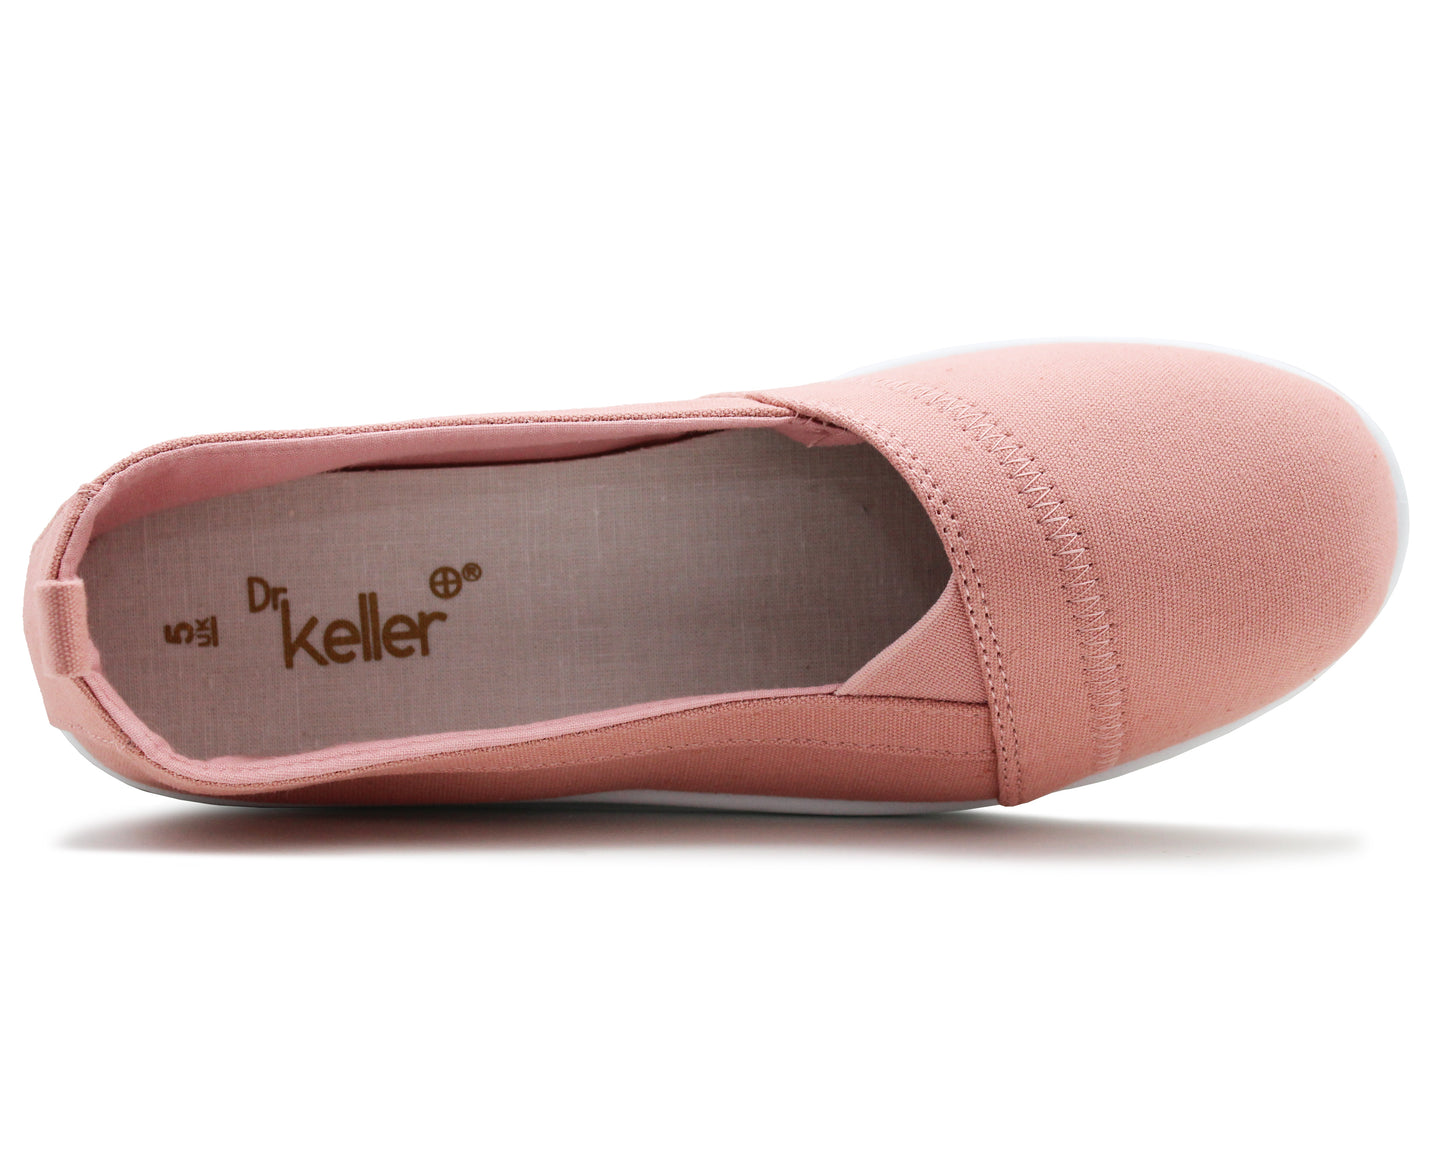 Womens Pink Canvas Slip On Plimsolls Flat Pumps Casual Espadrilles Loafer Trainers